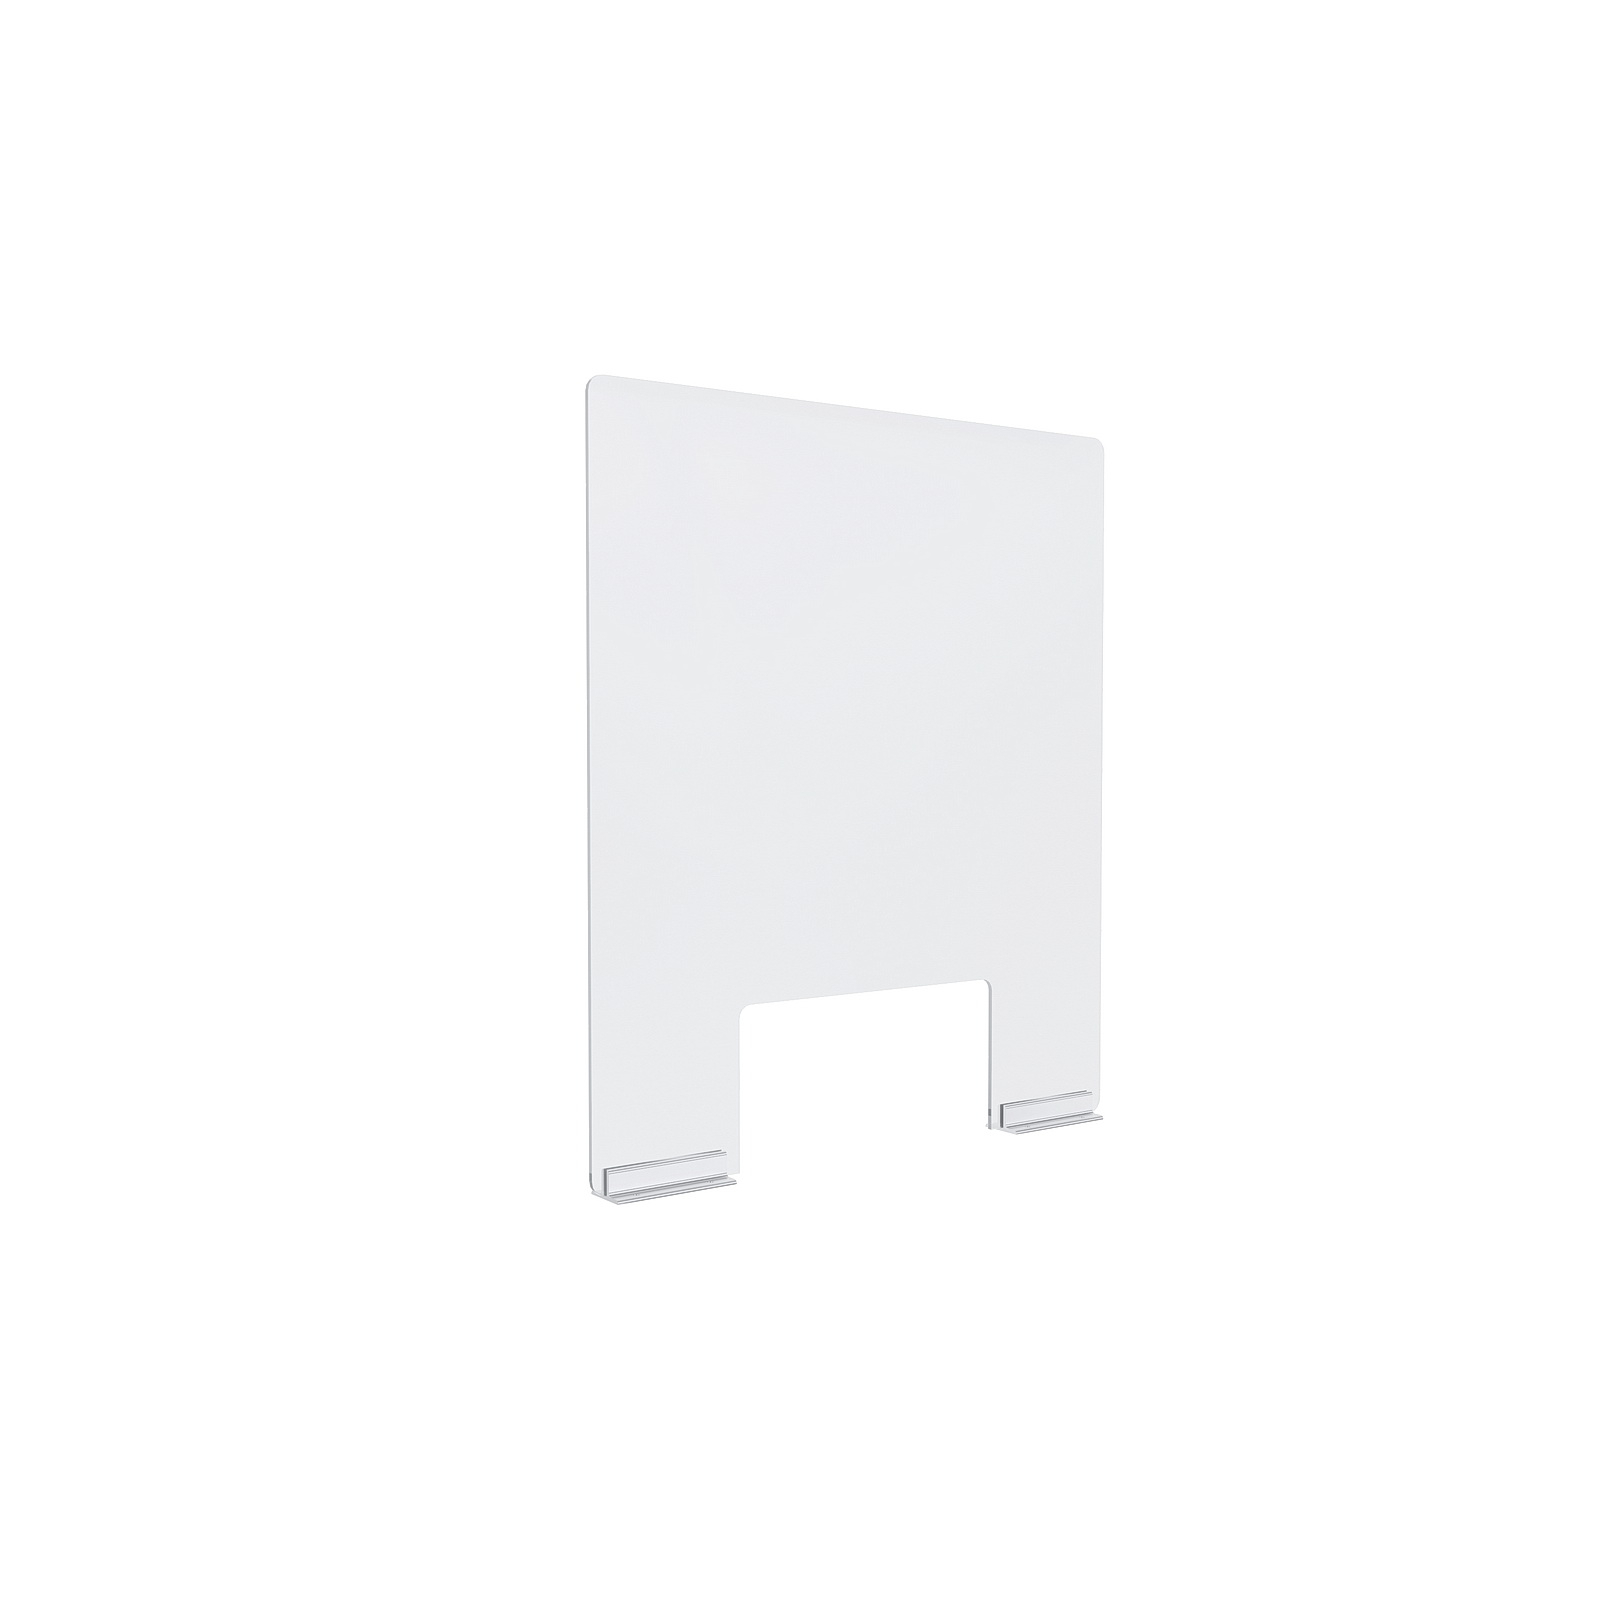 Clear Acrylic Sneeze Guard 20'' Wide x 23-1/2'' Tall (10'' x 5'' Cut Out), with (2) 4'' Clear Anodized Aluminum Channel Mounts